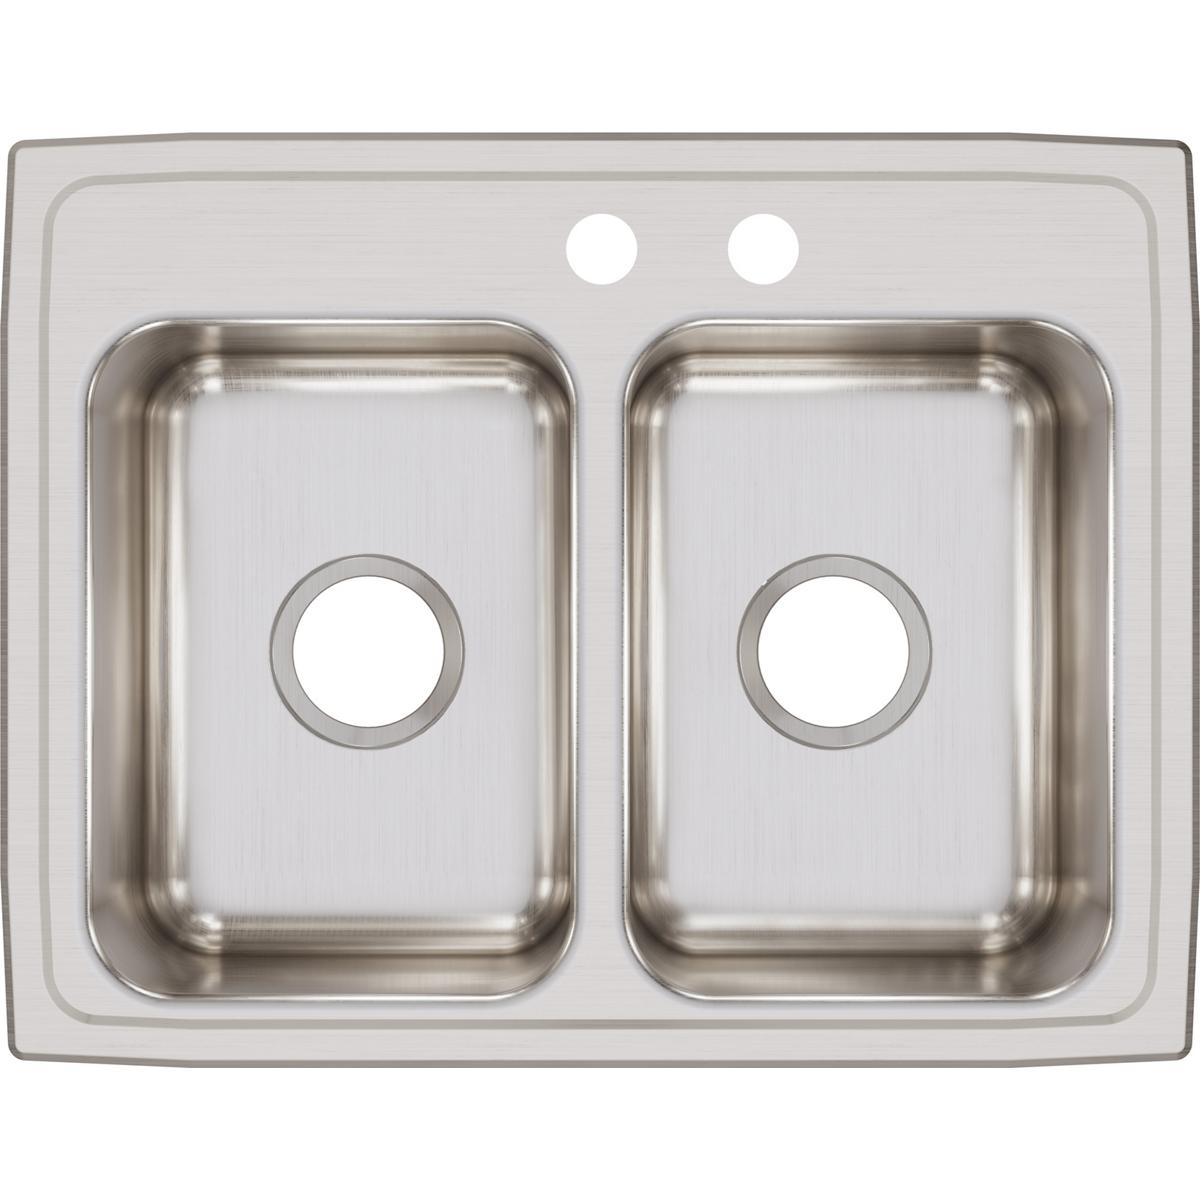 Elkay Lustertone Classic 25" x 19-1/2" x 7-5/8" Equal Double Bowl Drop-in Stainless Steel Sink